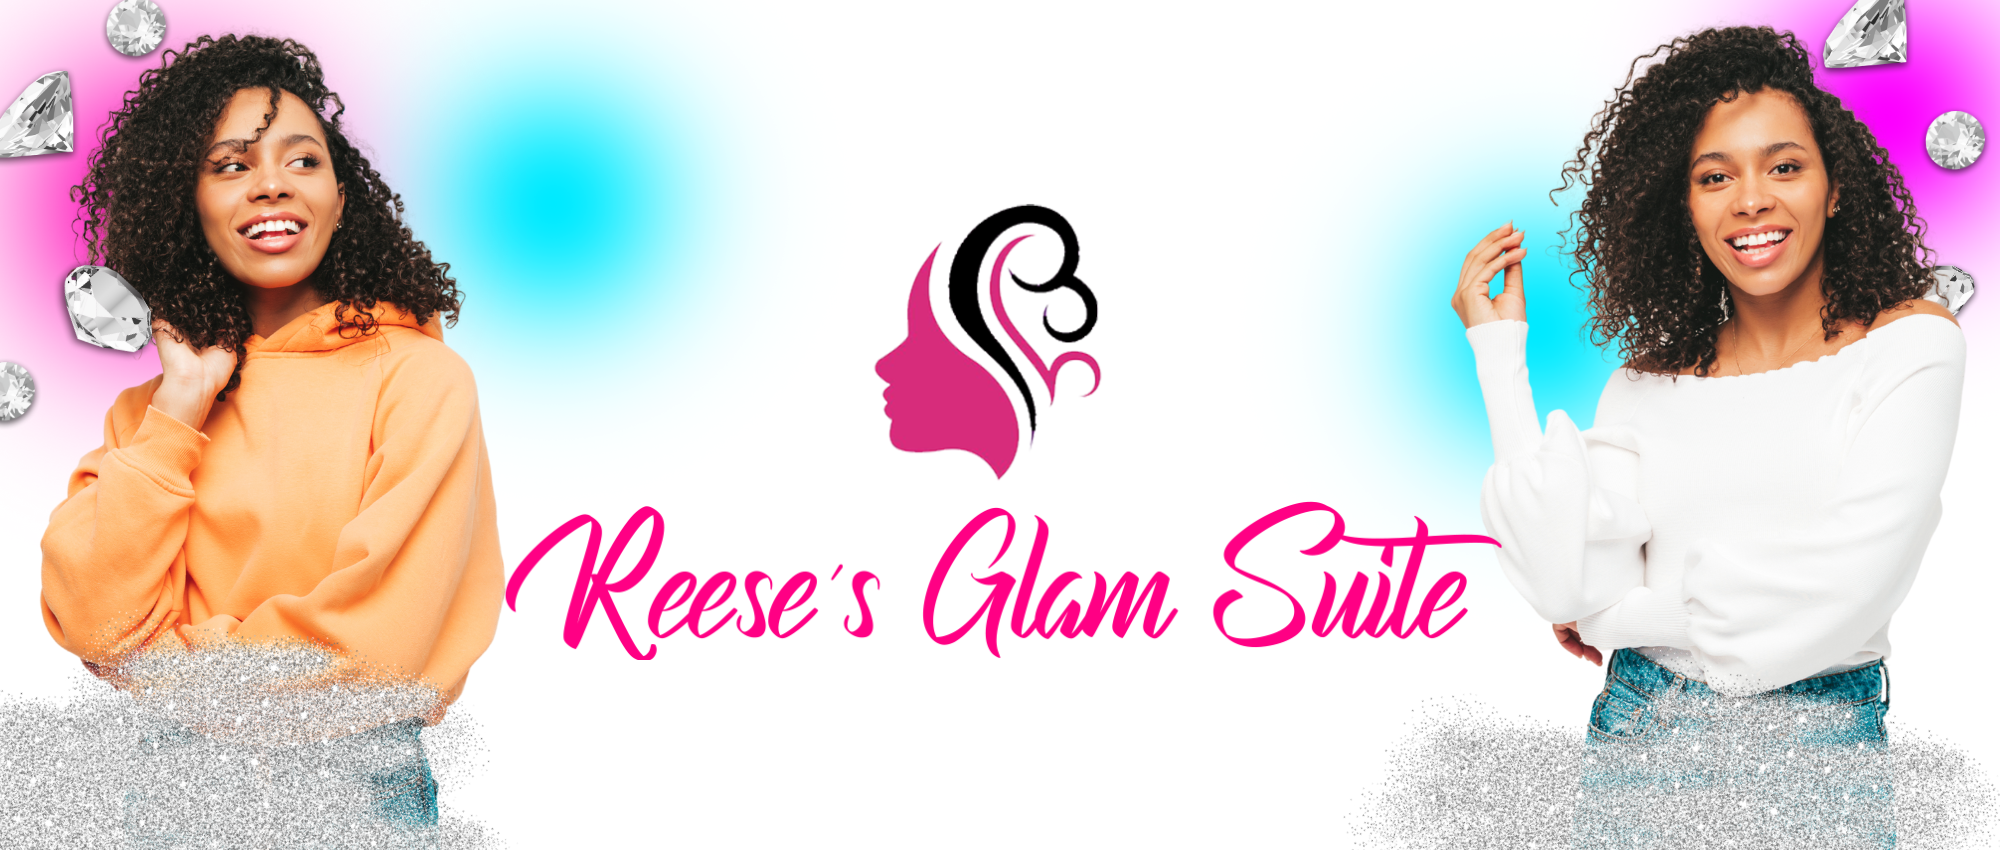 Reese's Glam Suite